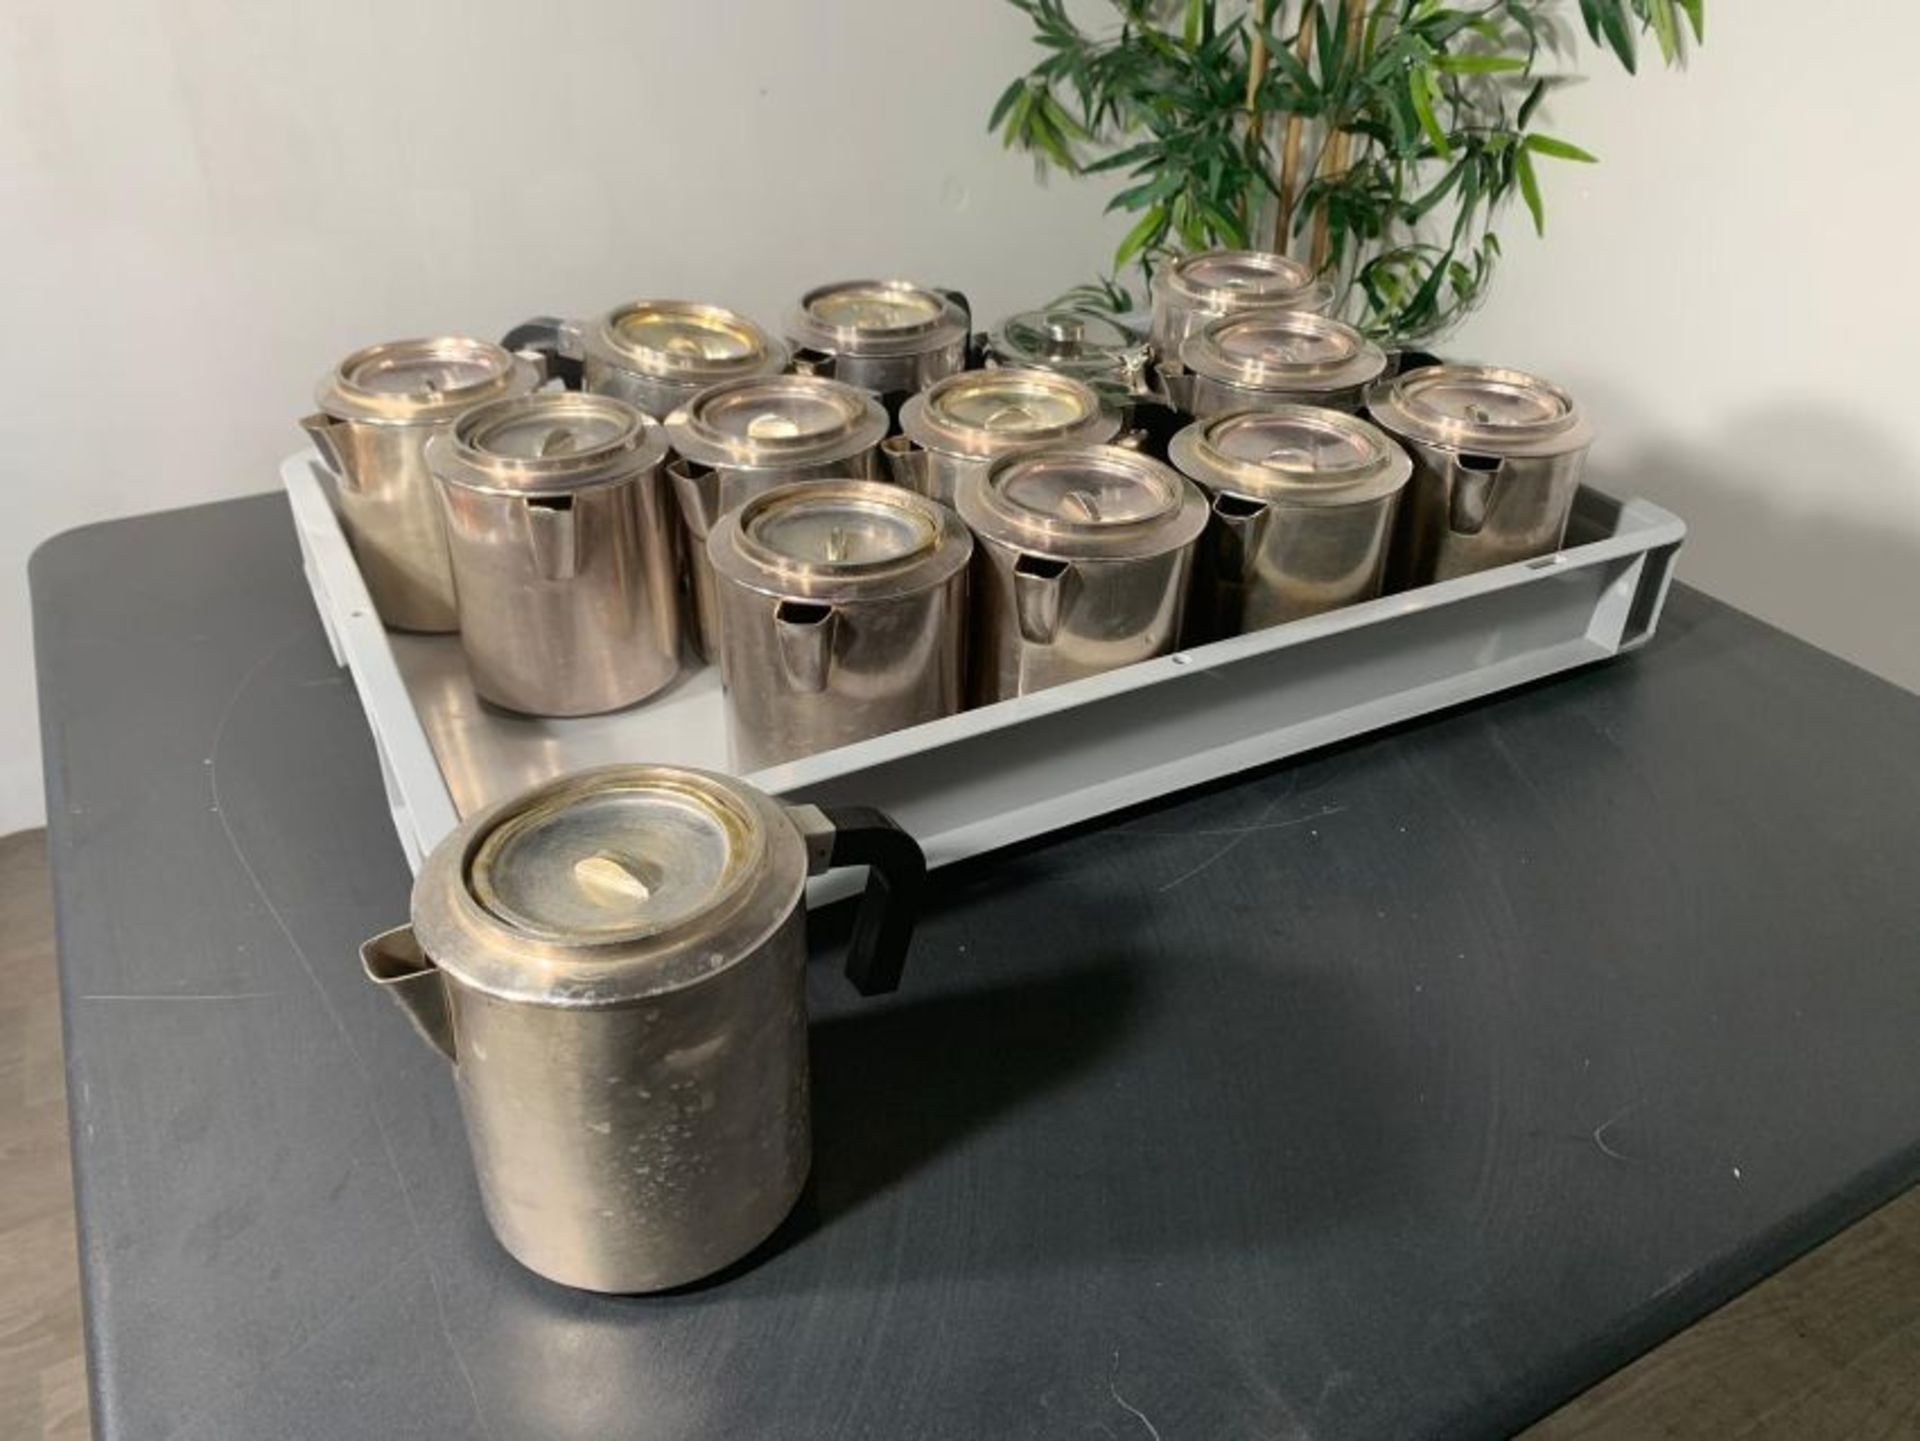 Stainless Steel Teapots Exluding Lids x 8. - Image 4 of 5